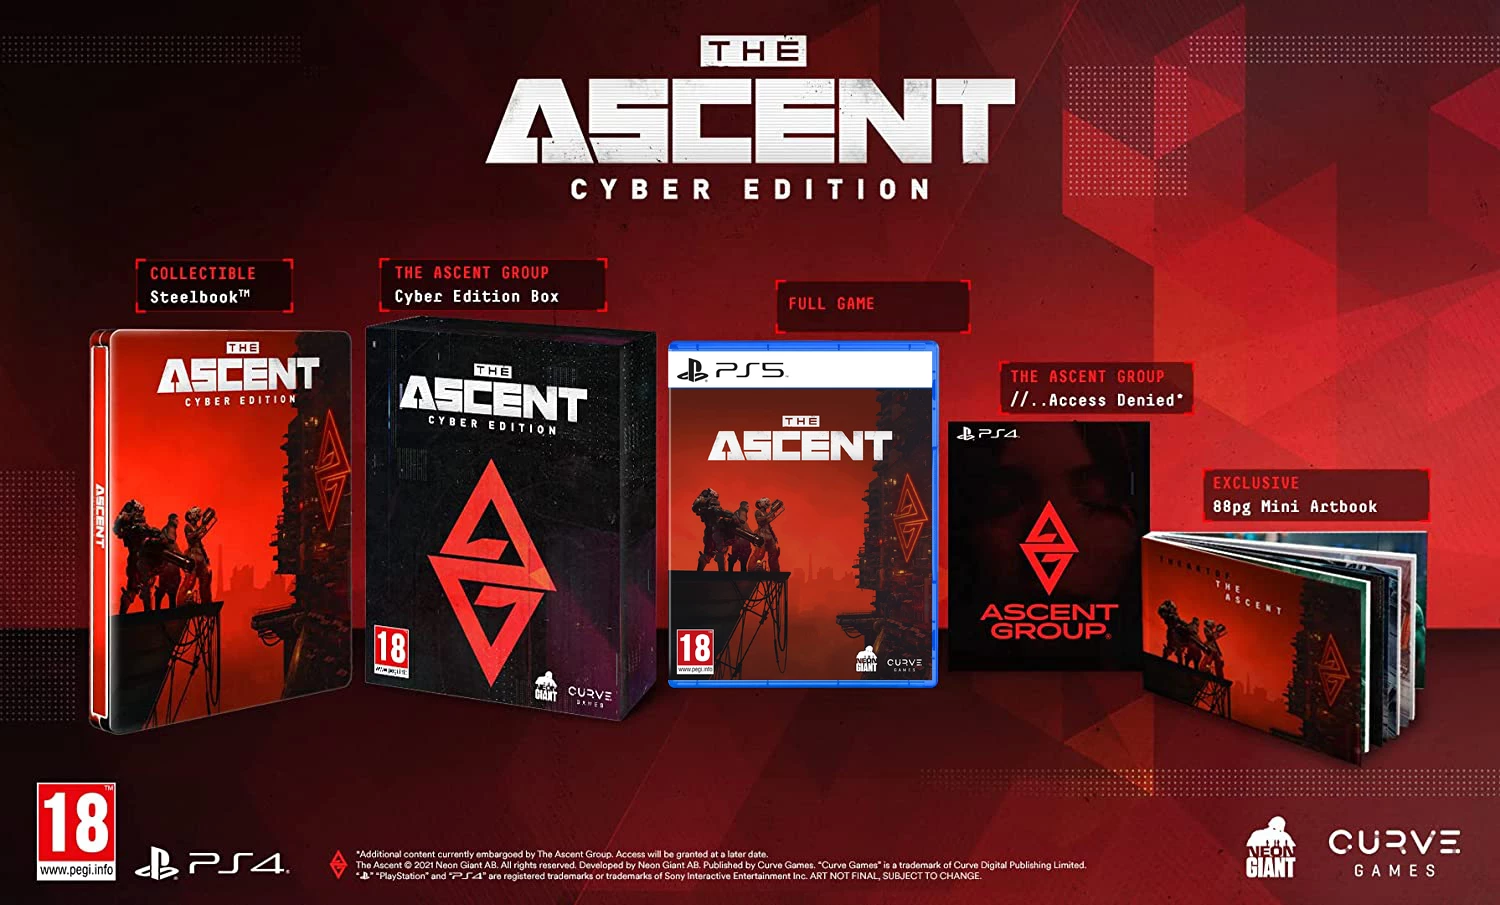 The Ascent - Cyber Edition (PS5), Curve Games